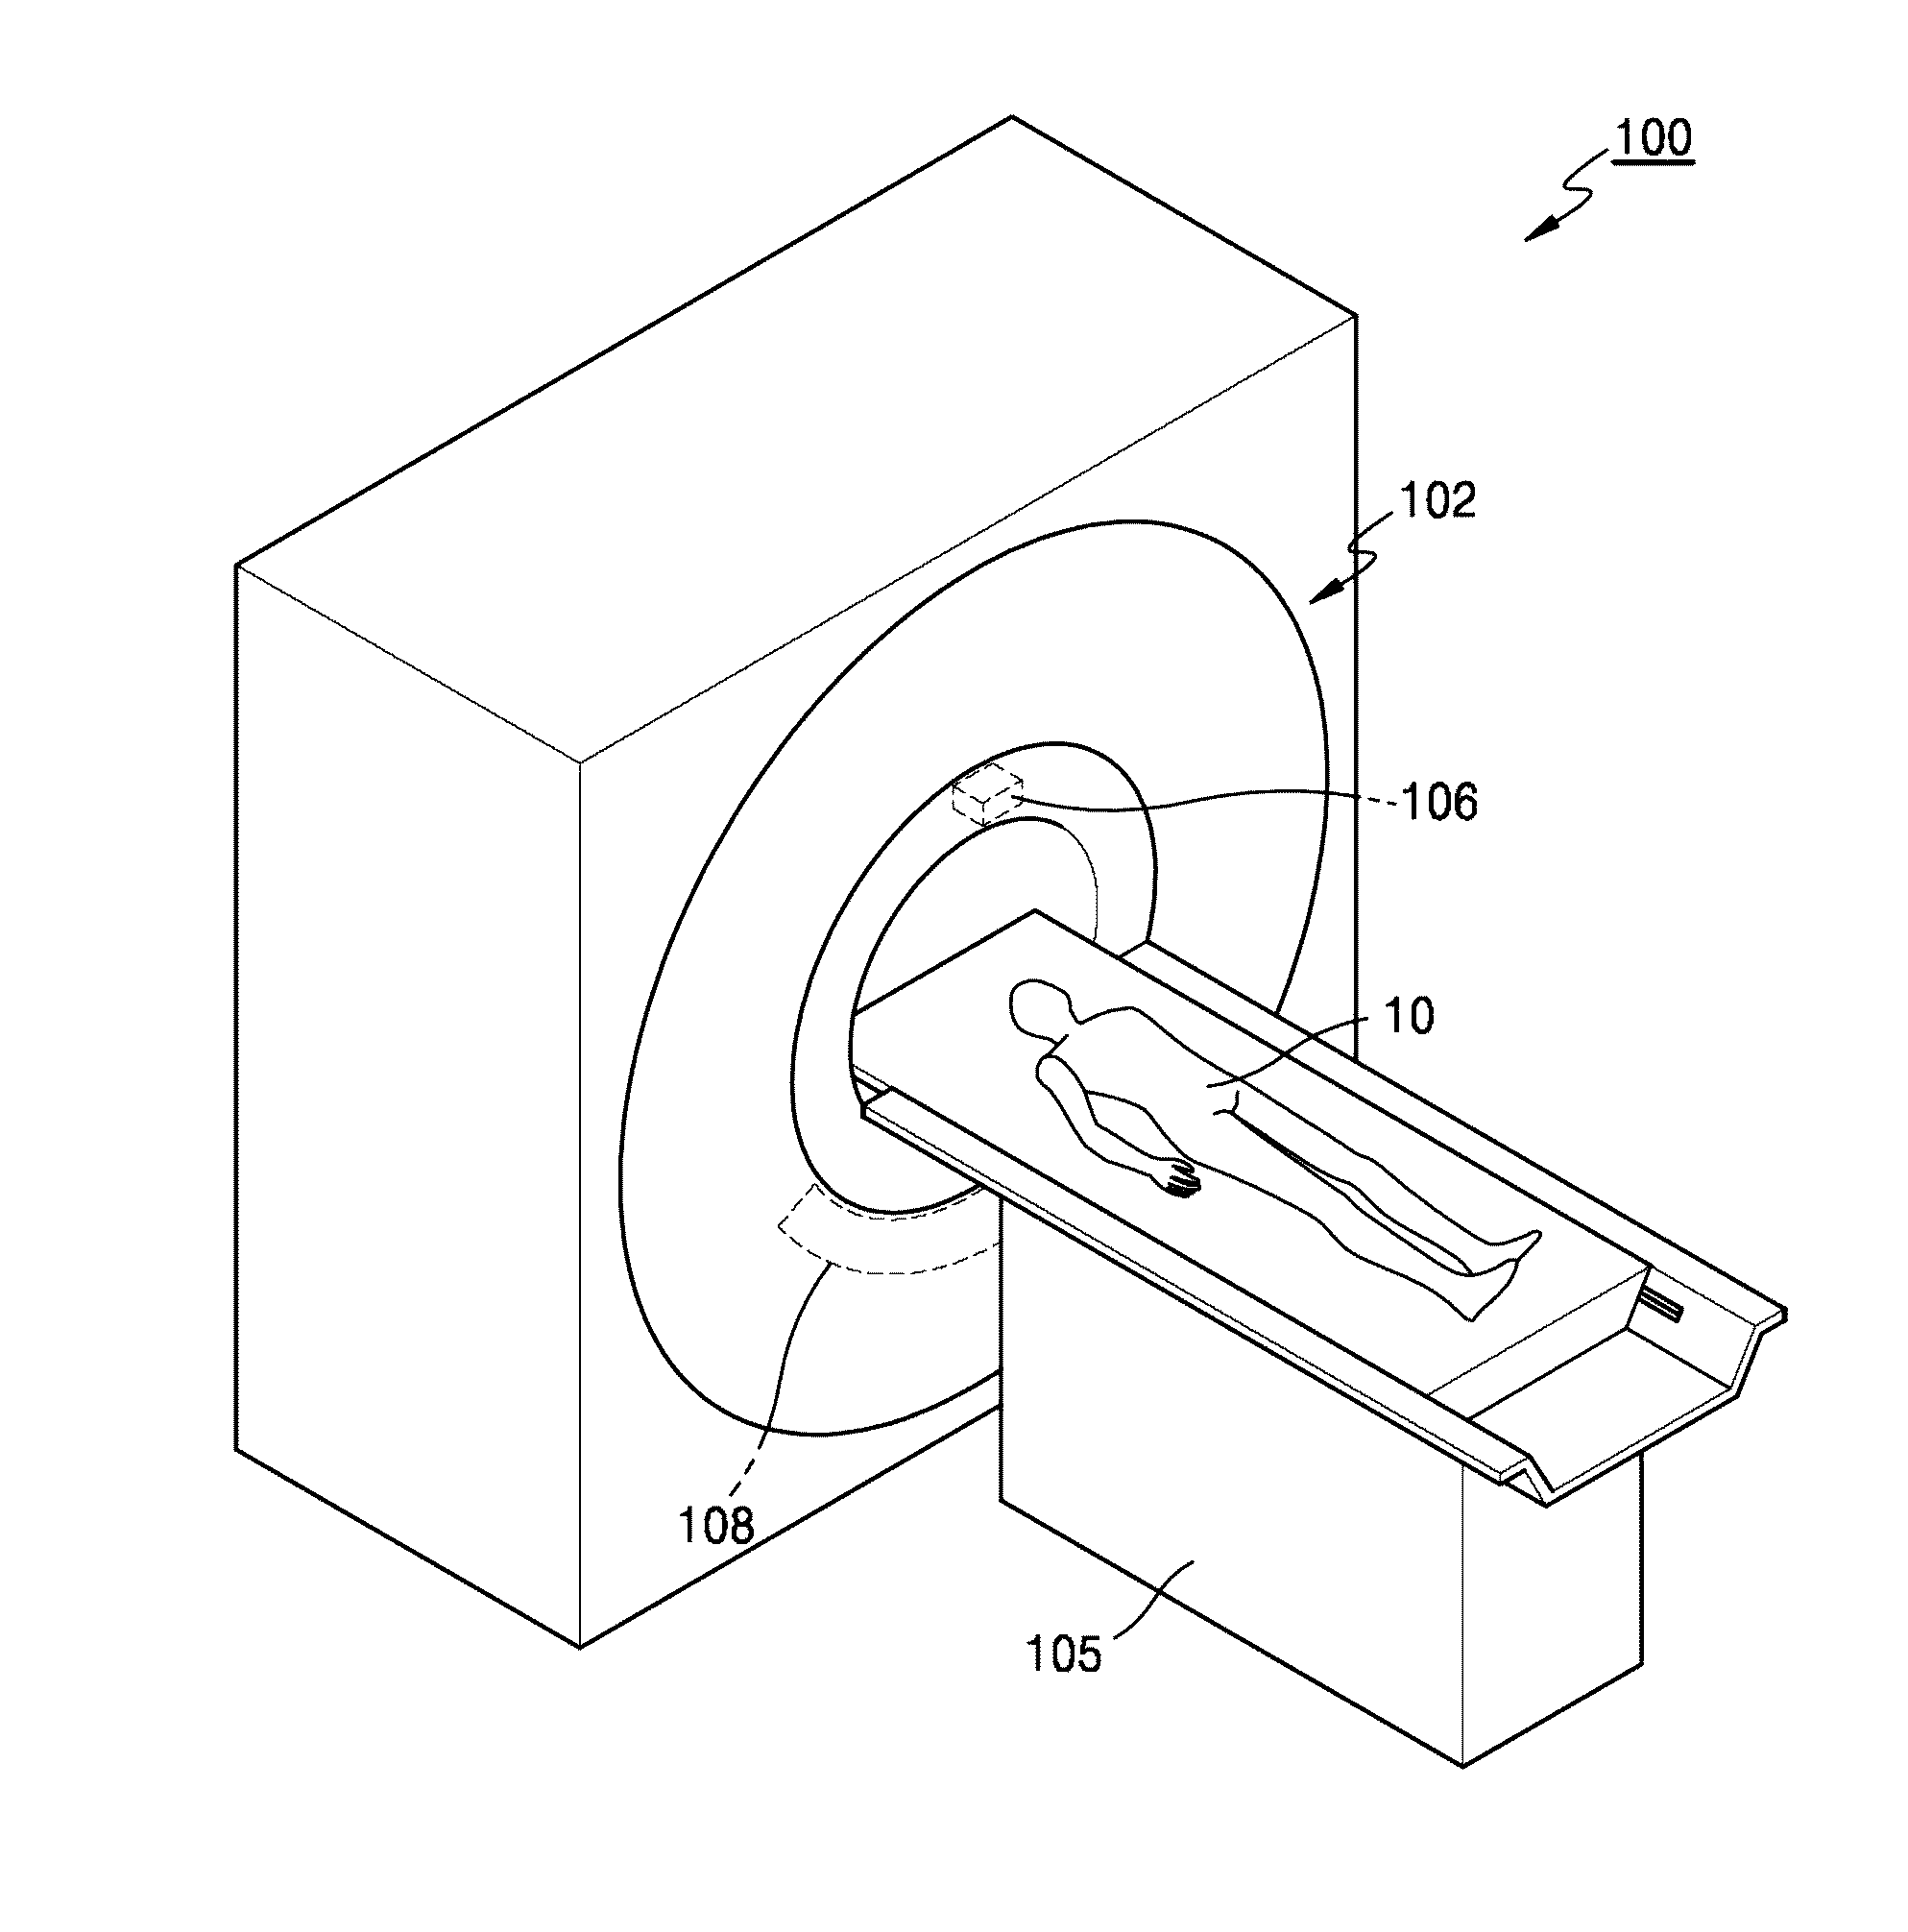 Tomography apparatus and method of reconstructing tomography images